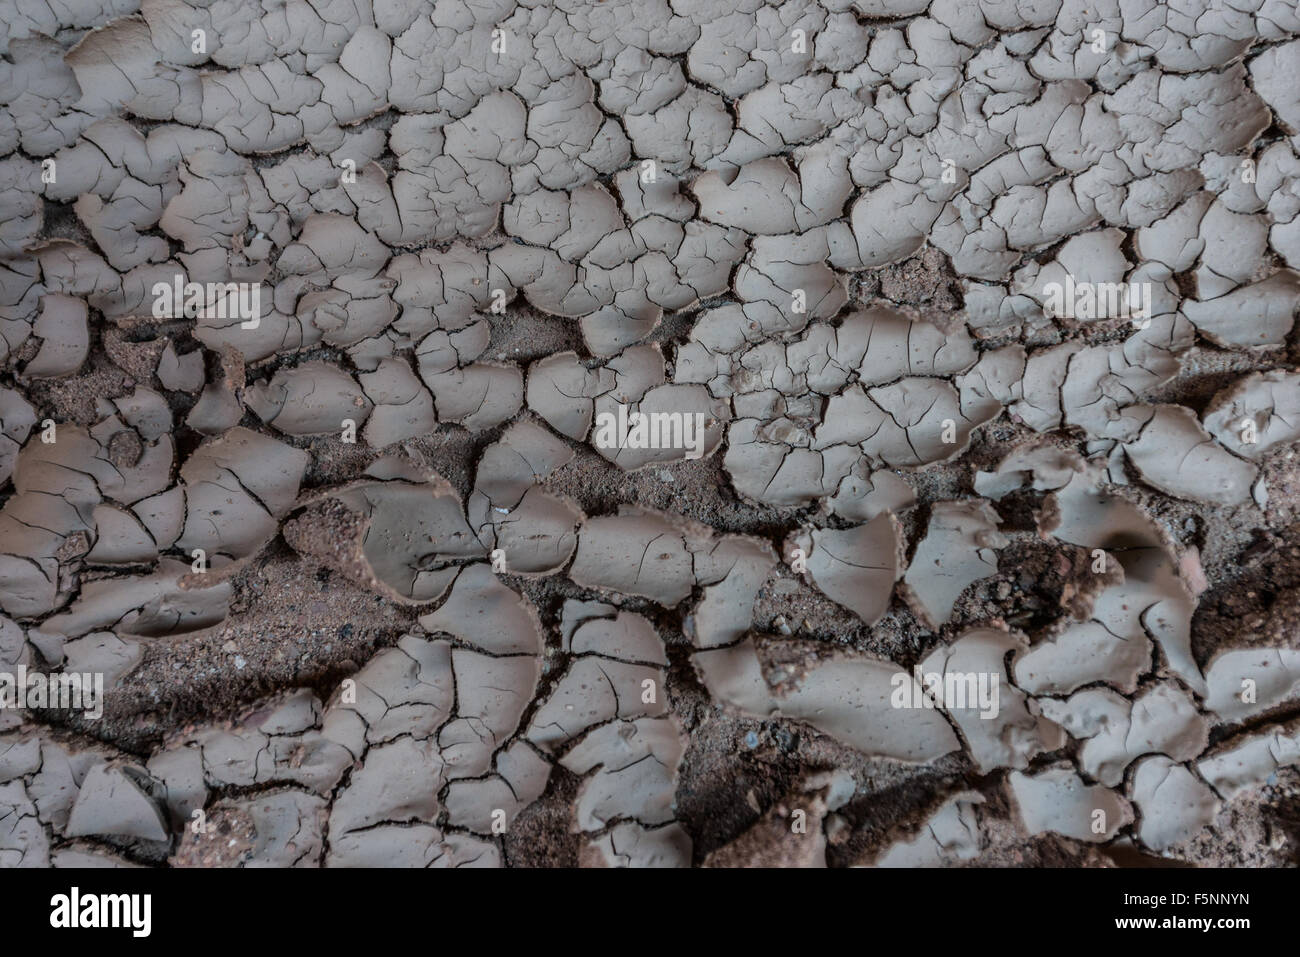 Cracked mud clay soil and pebbles background Stock Photo